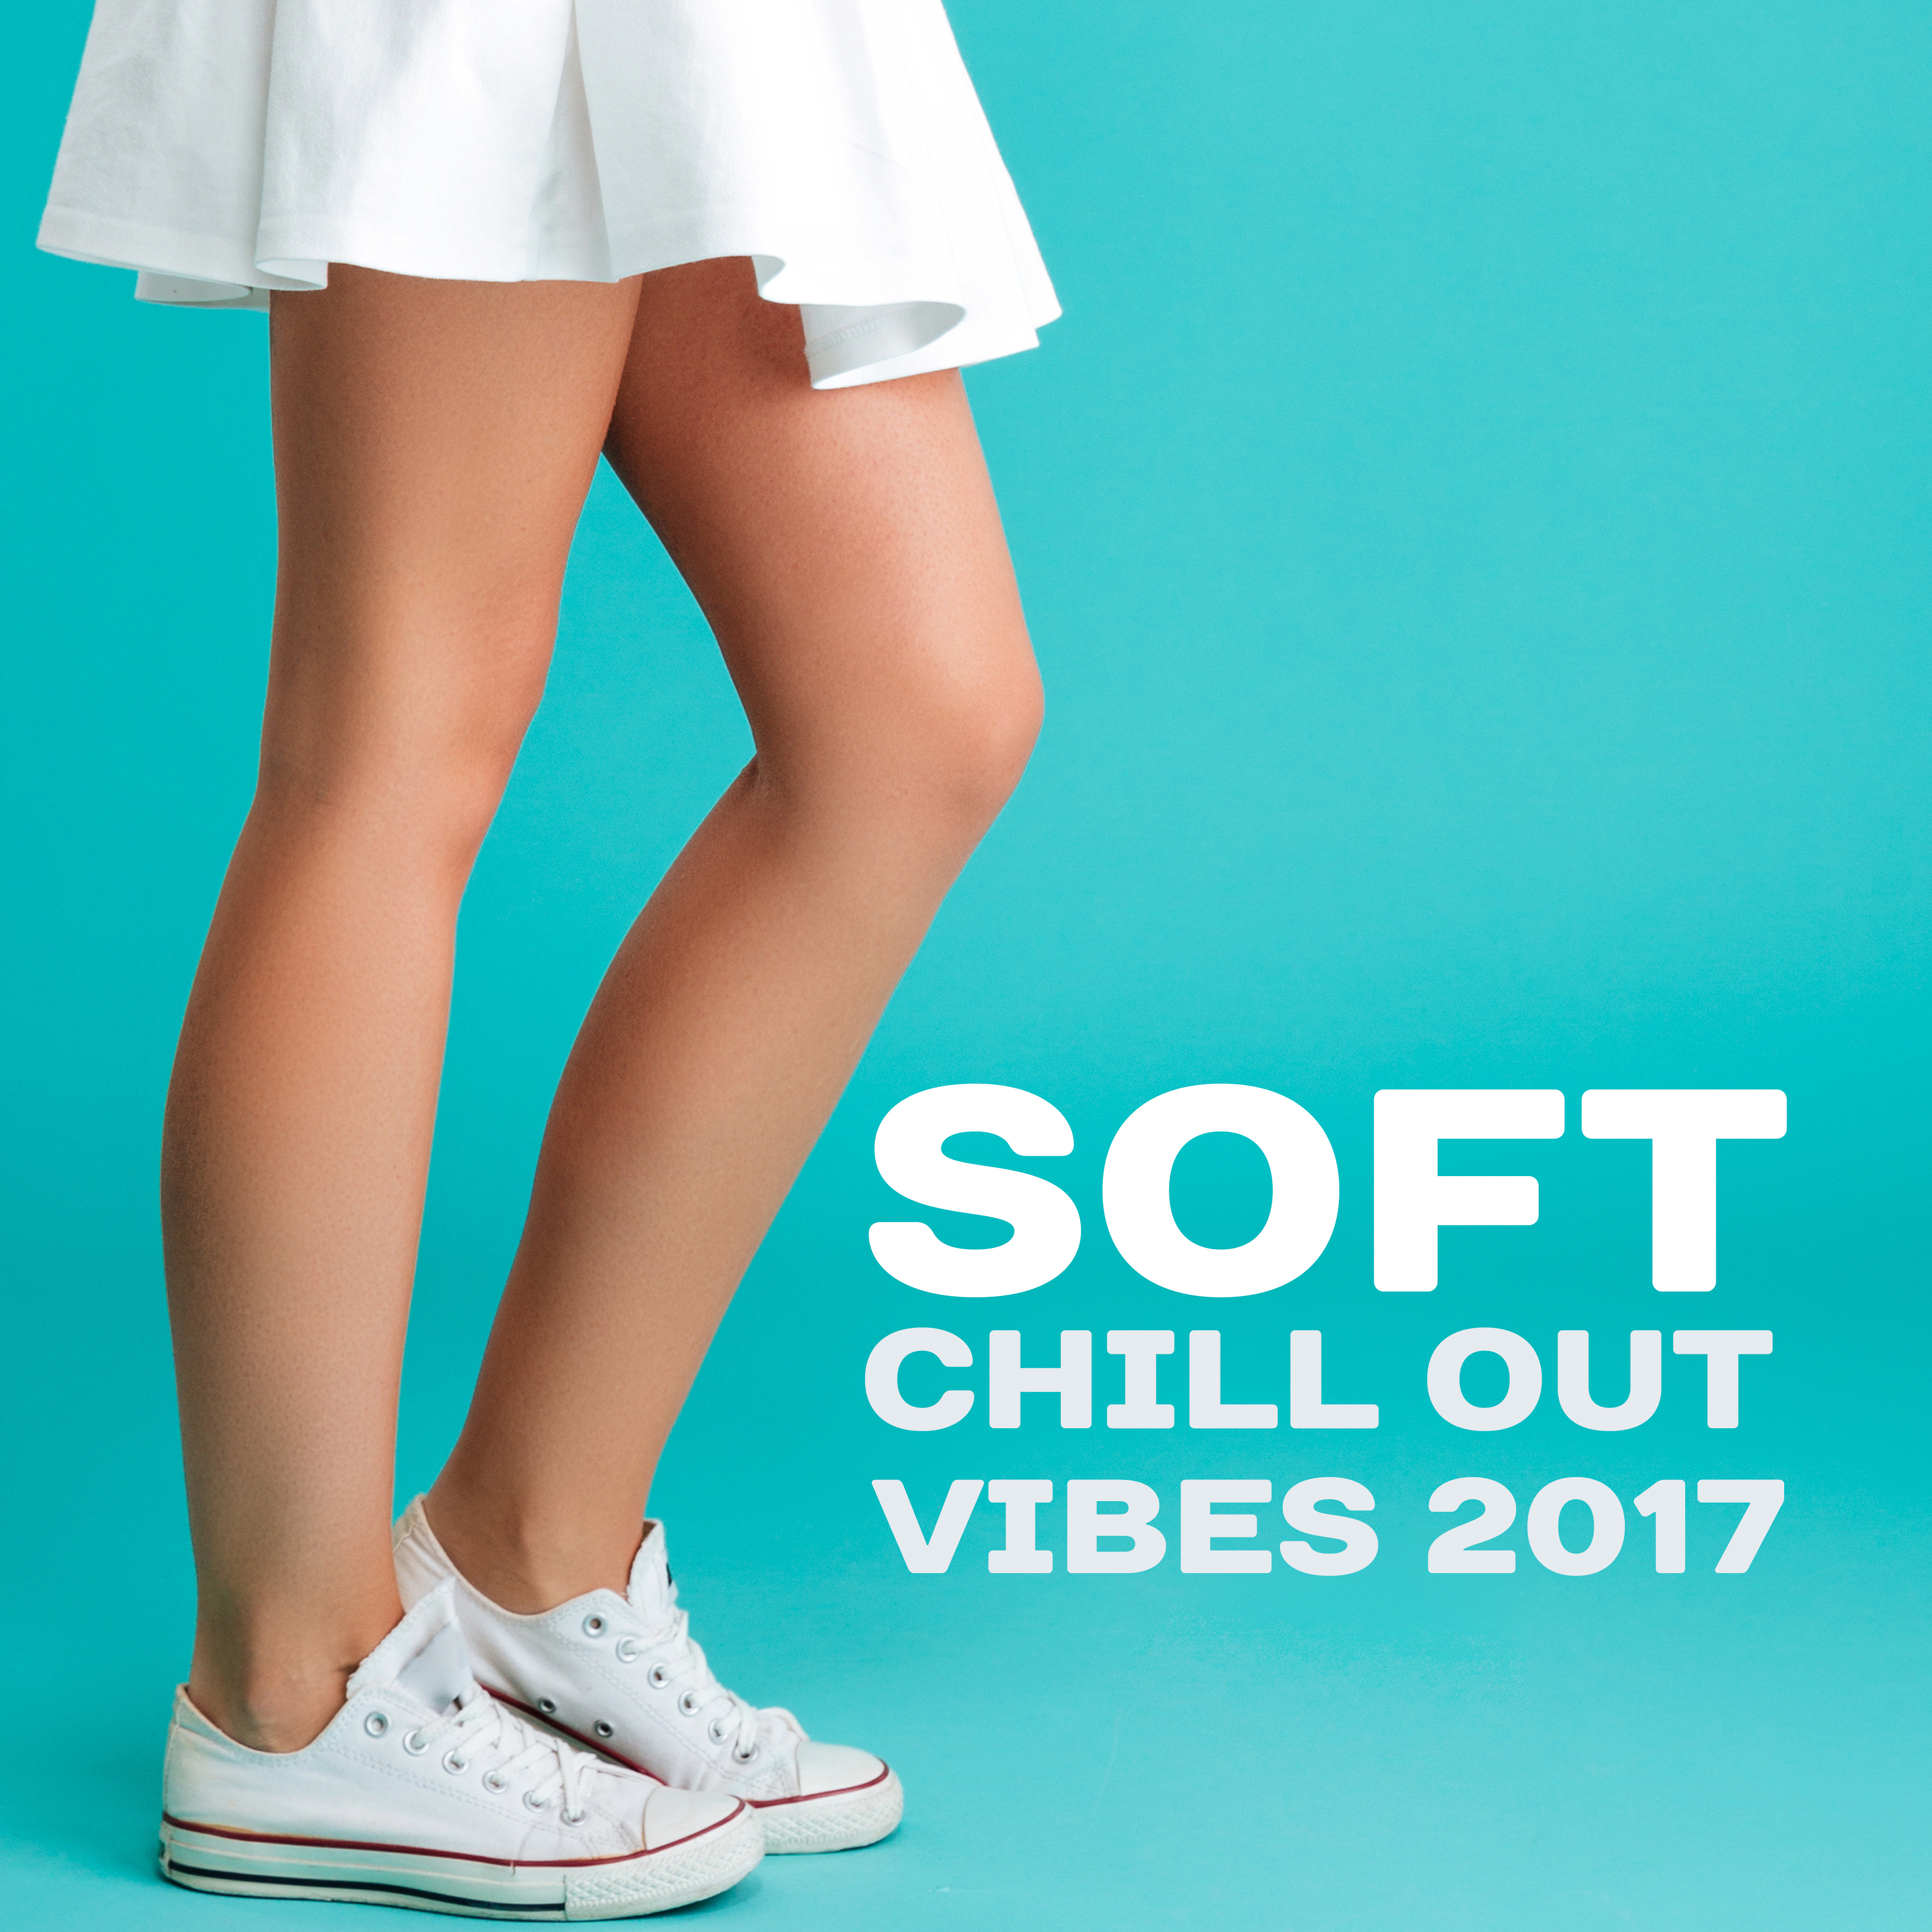 Soft Chill Out Vibes 2017 – Summer Rest, Beach Relaxation, Ibiza Vibes, Time for You